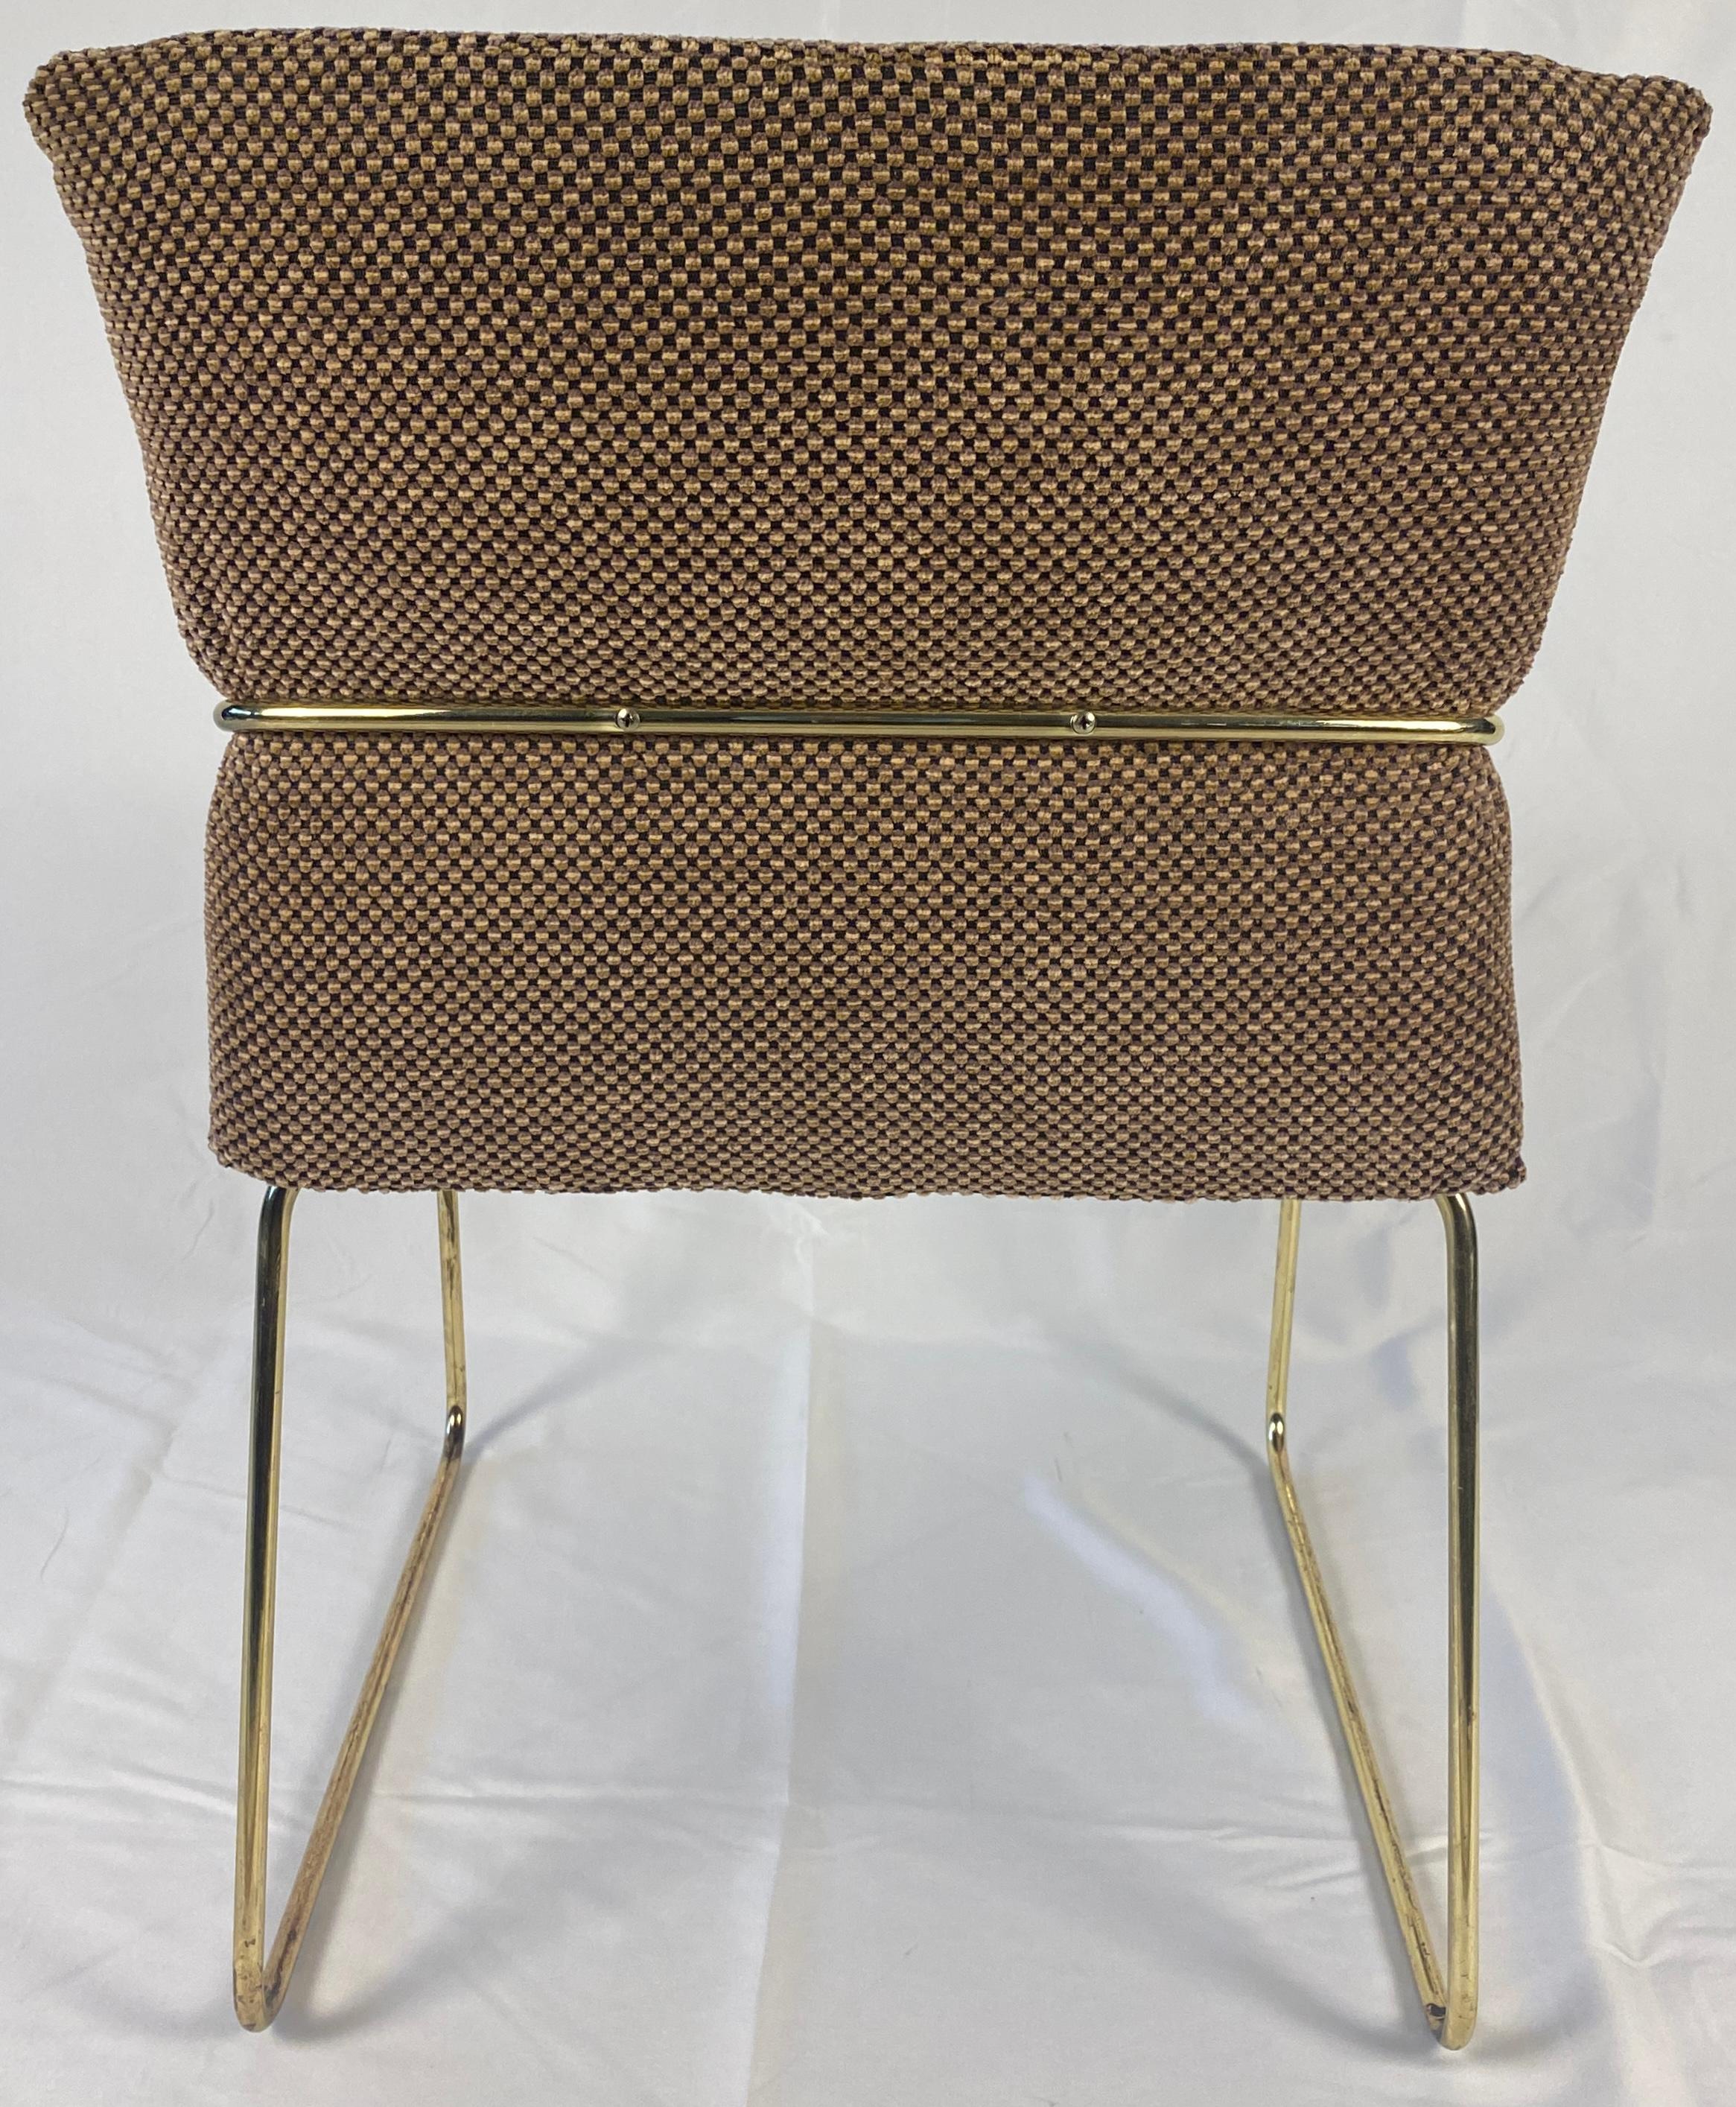 Set of 4 Brass Side Chairs or Upholstered Dining Chairs in the style of Milo Baughman.

This set of 4 dining chairs with tubular frames in polished brass finish, may have been designed by Milo Baughman for Thayer Coggin, USA are circa 1970.

Very